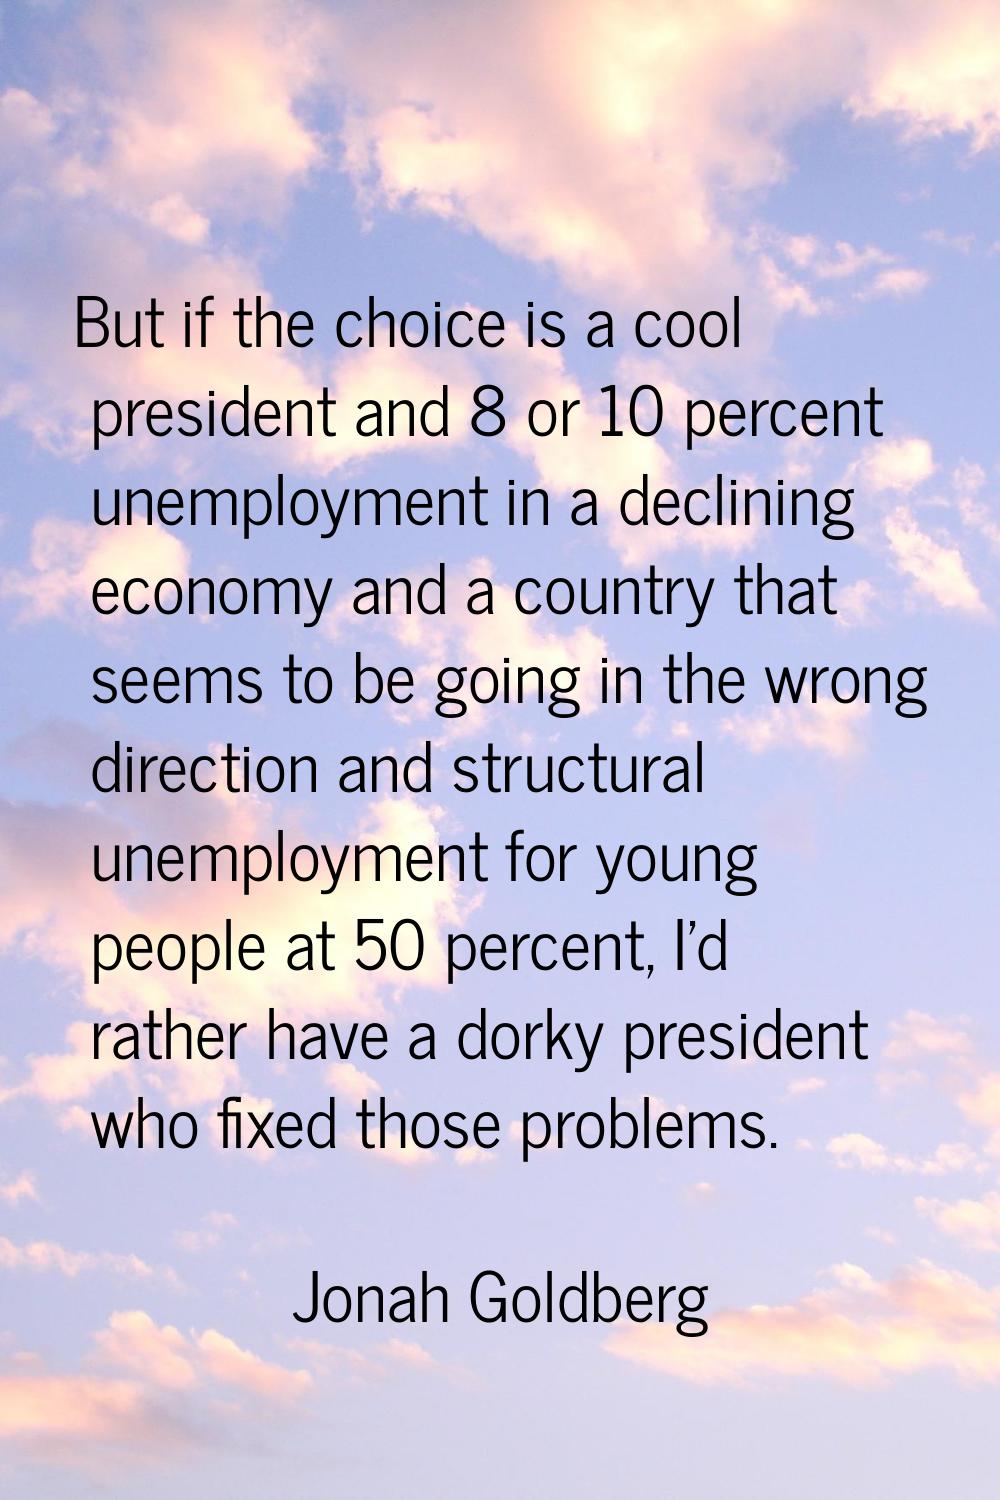 But if the choice is a cool president and 8 or 10 percent unemployment in a declining economy and a